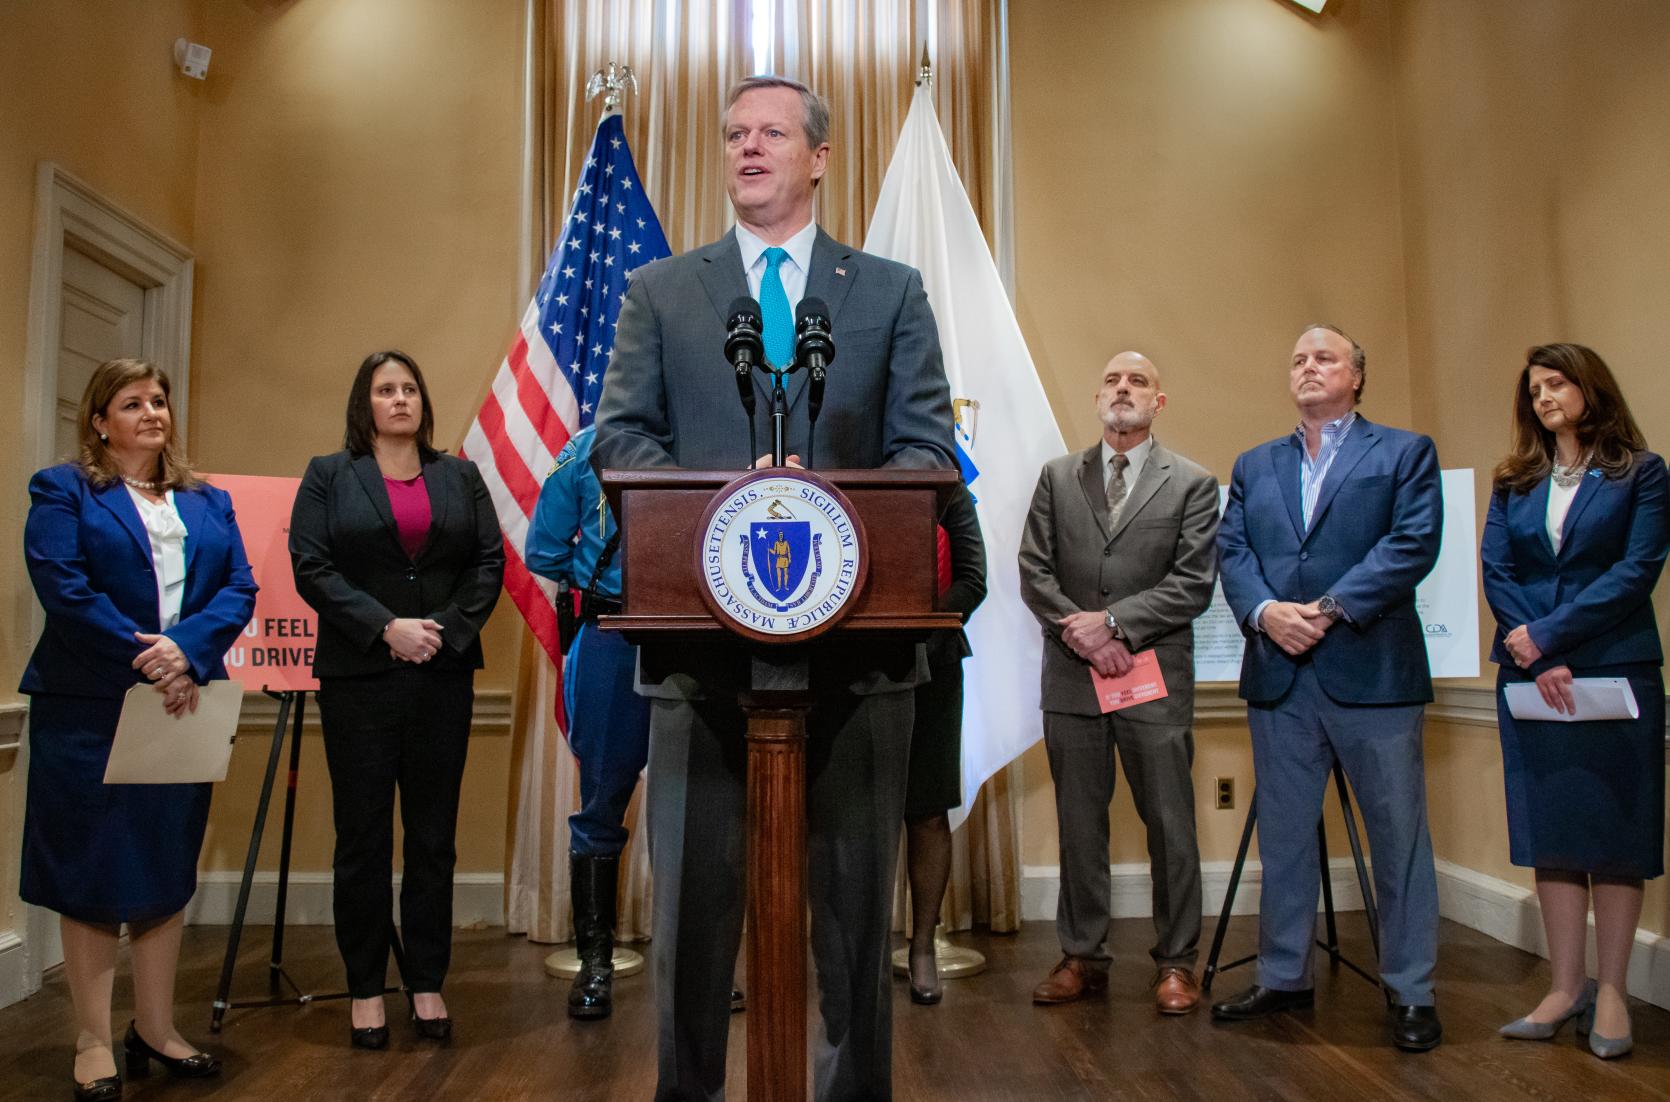 Baker-Polito Administration Brings Awareness to Dangers Of Illegally Driving Under The Influence 